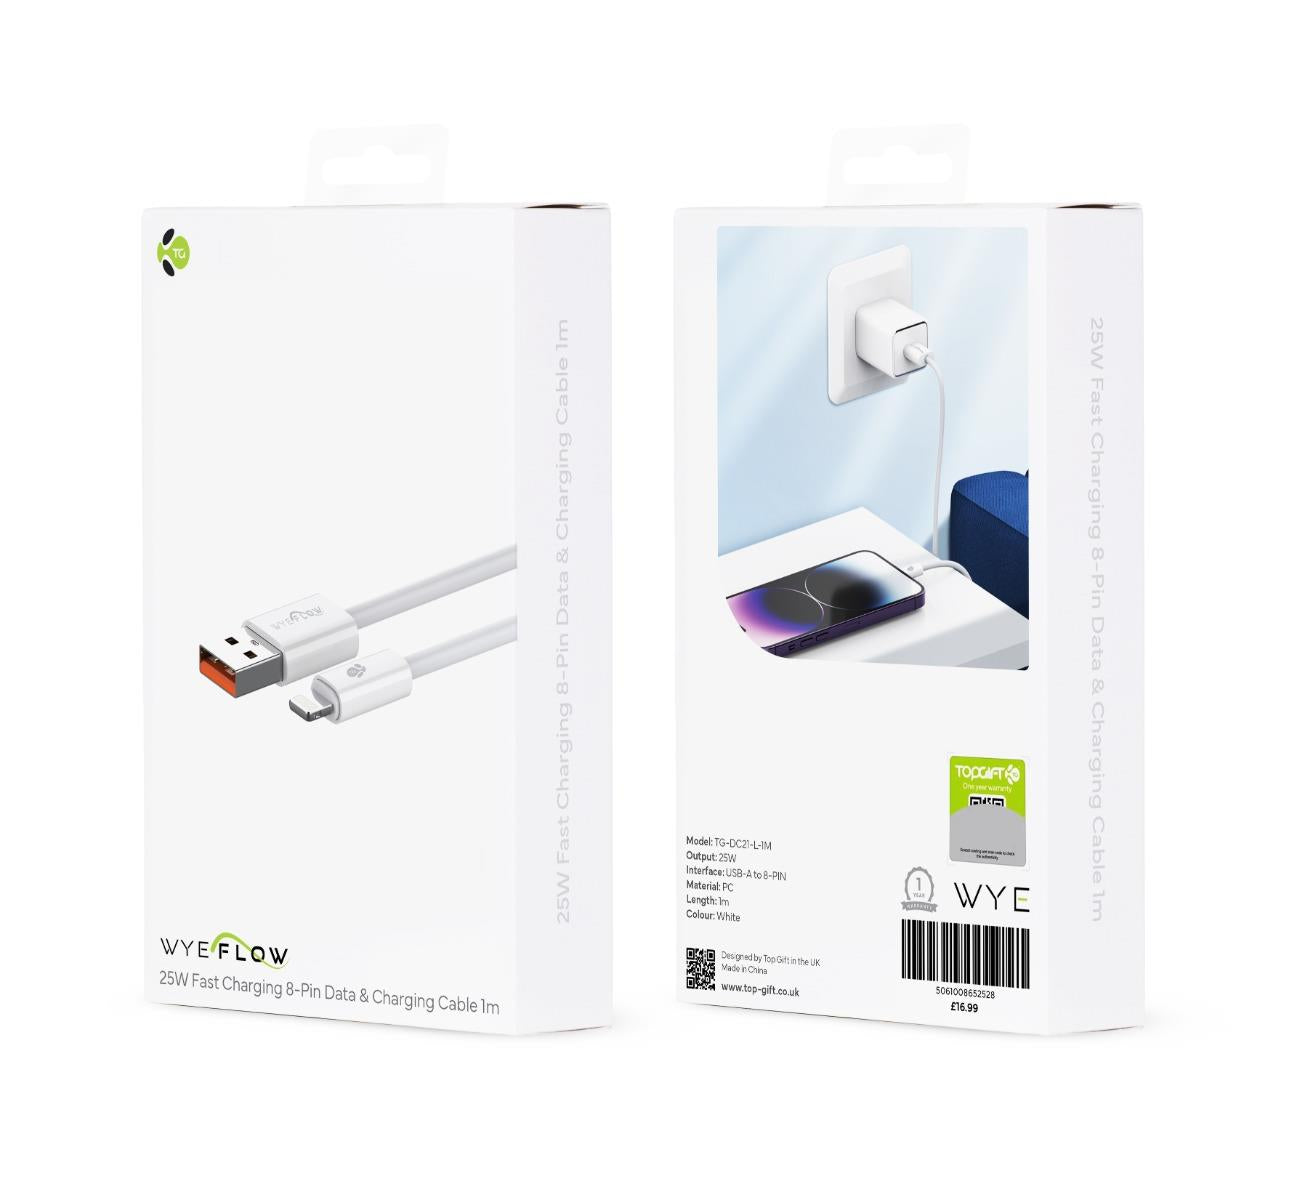 WYEFLOW 25W Fast Charging 8-Pin Data & Charging Cable 1m